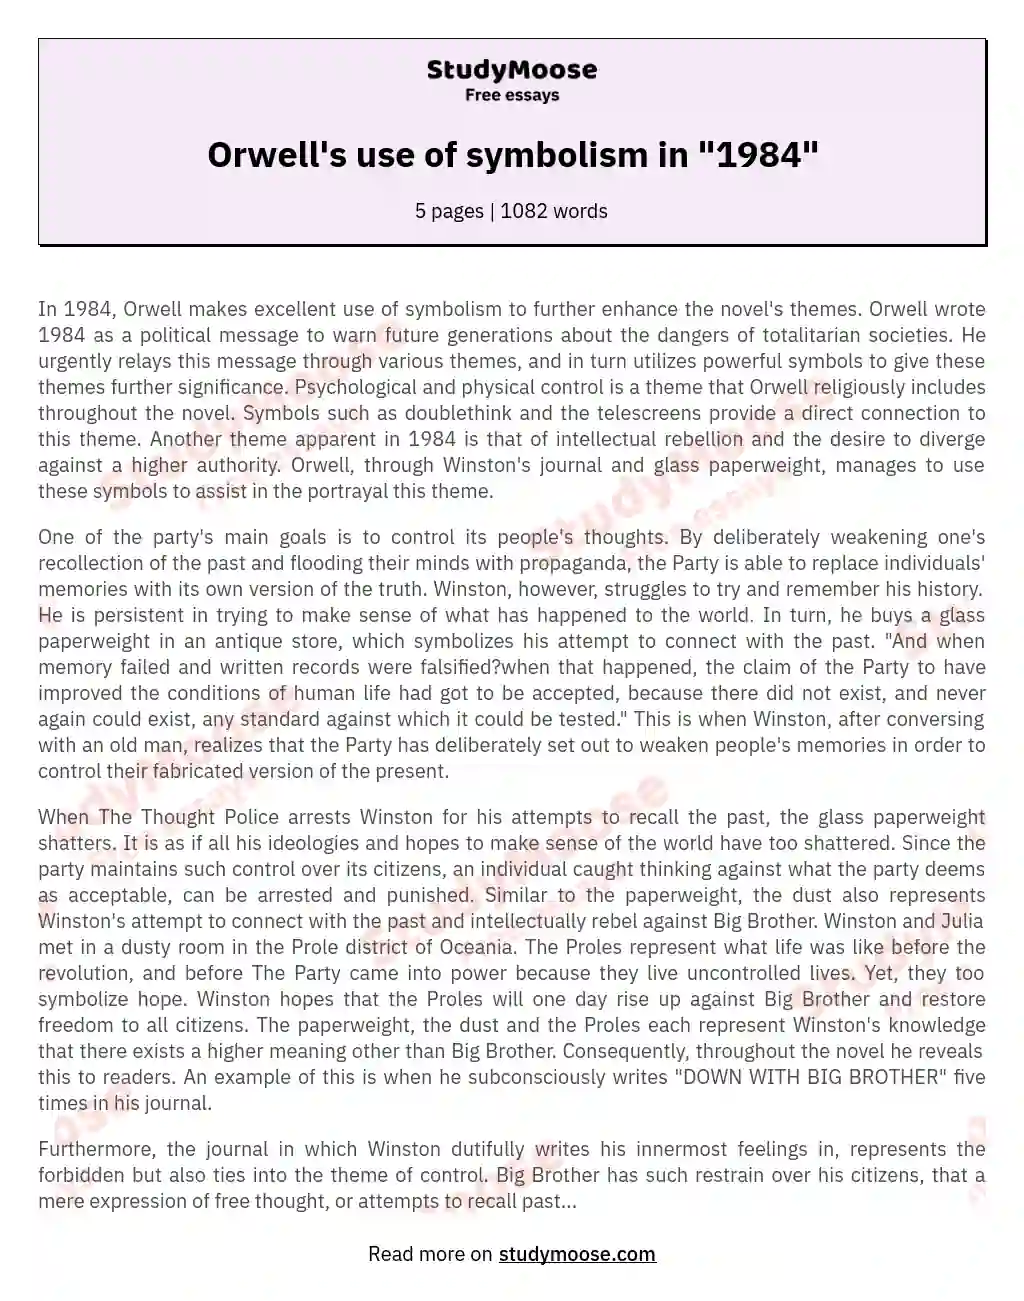 Orwell's use of symbolism in "1984" essay